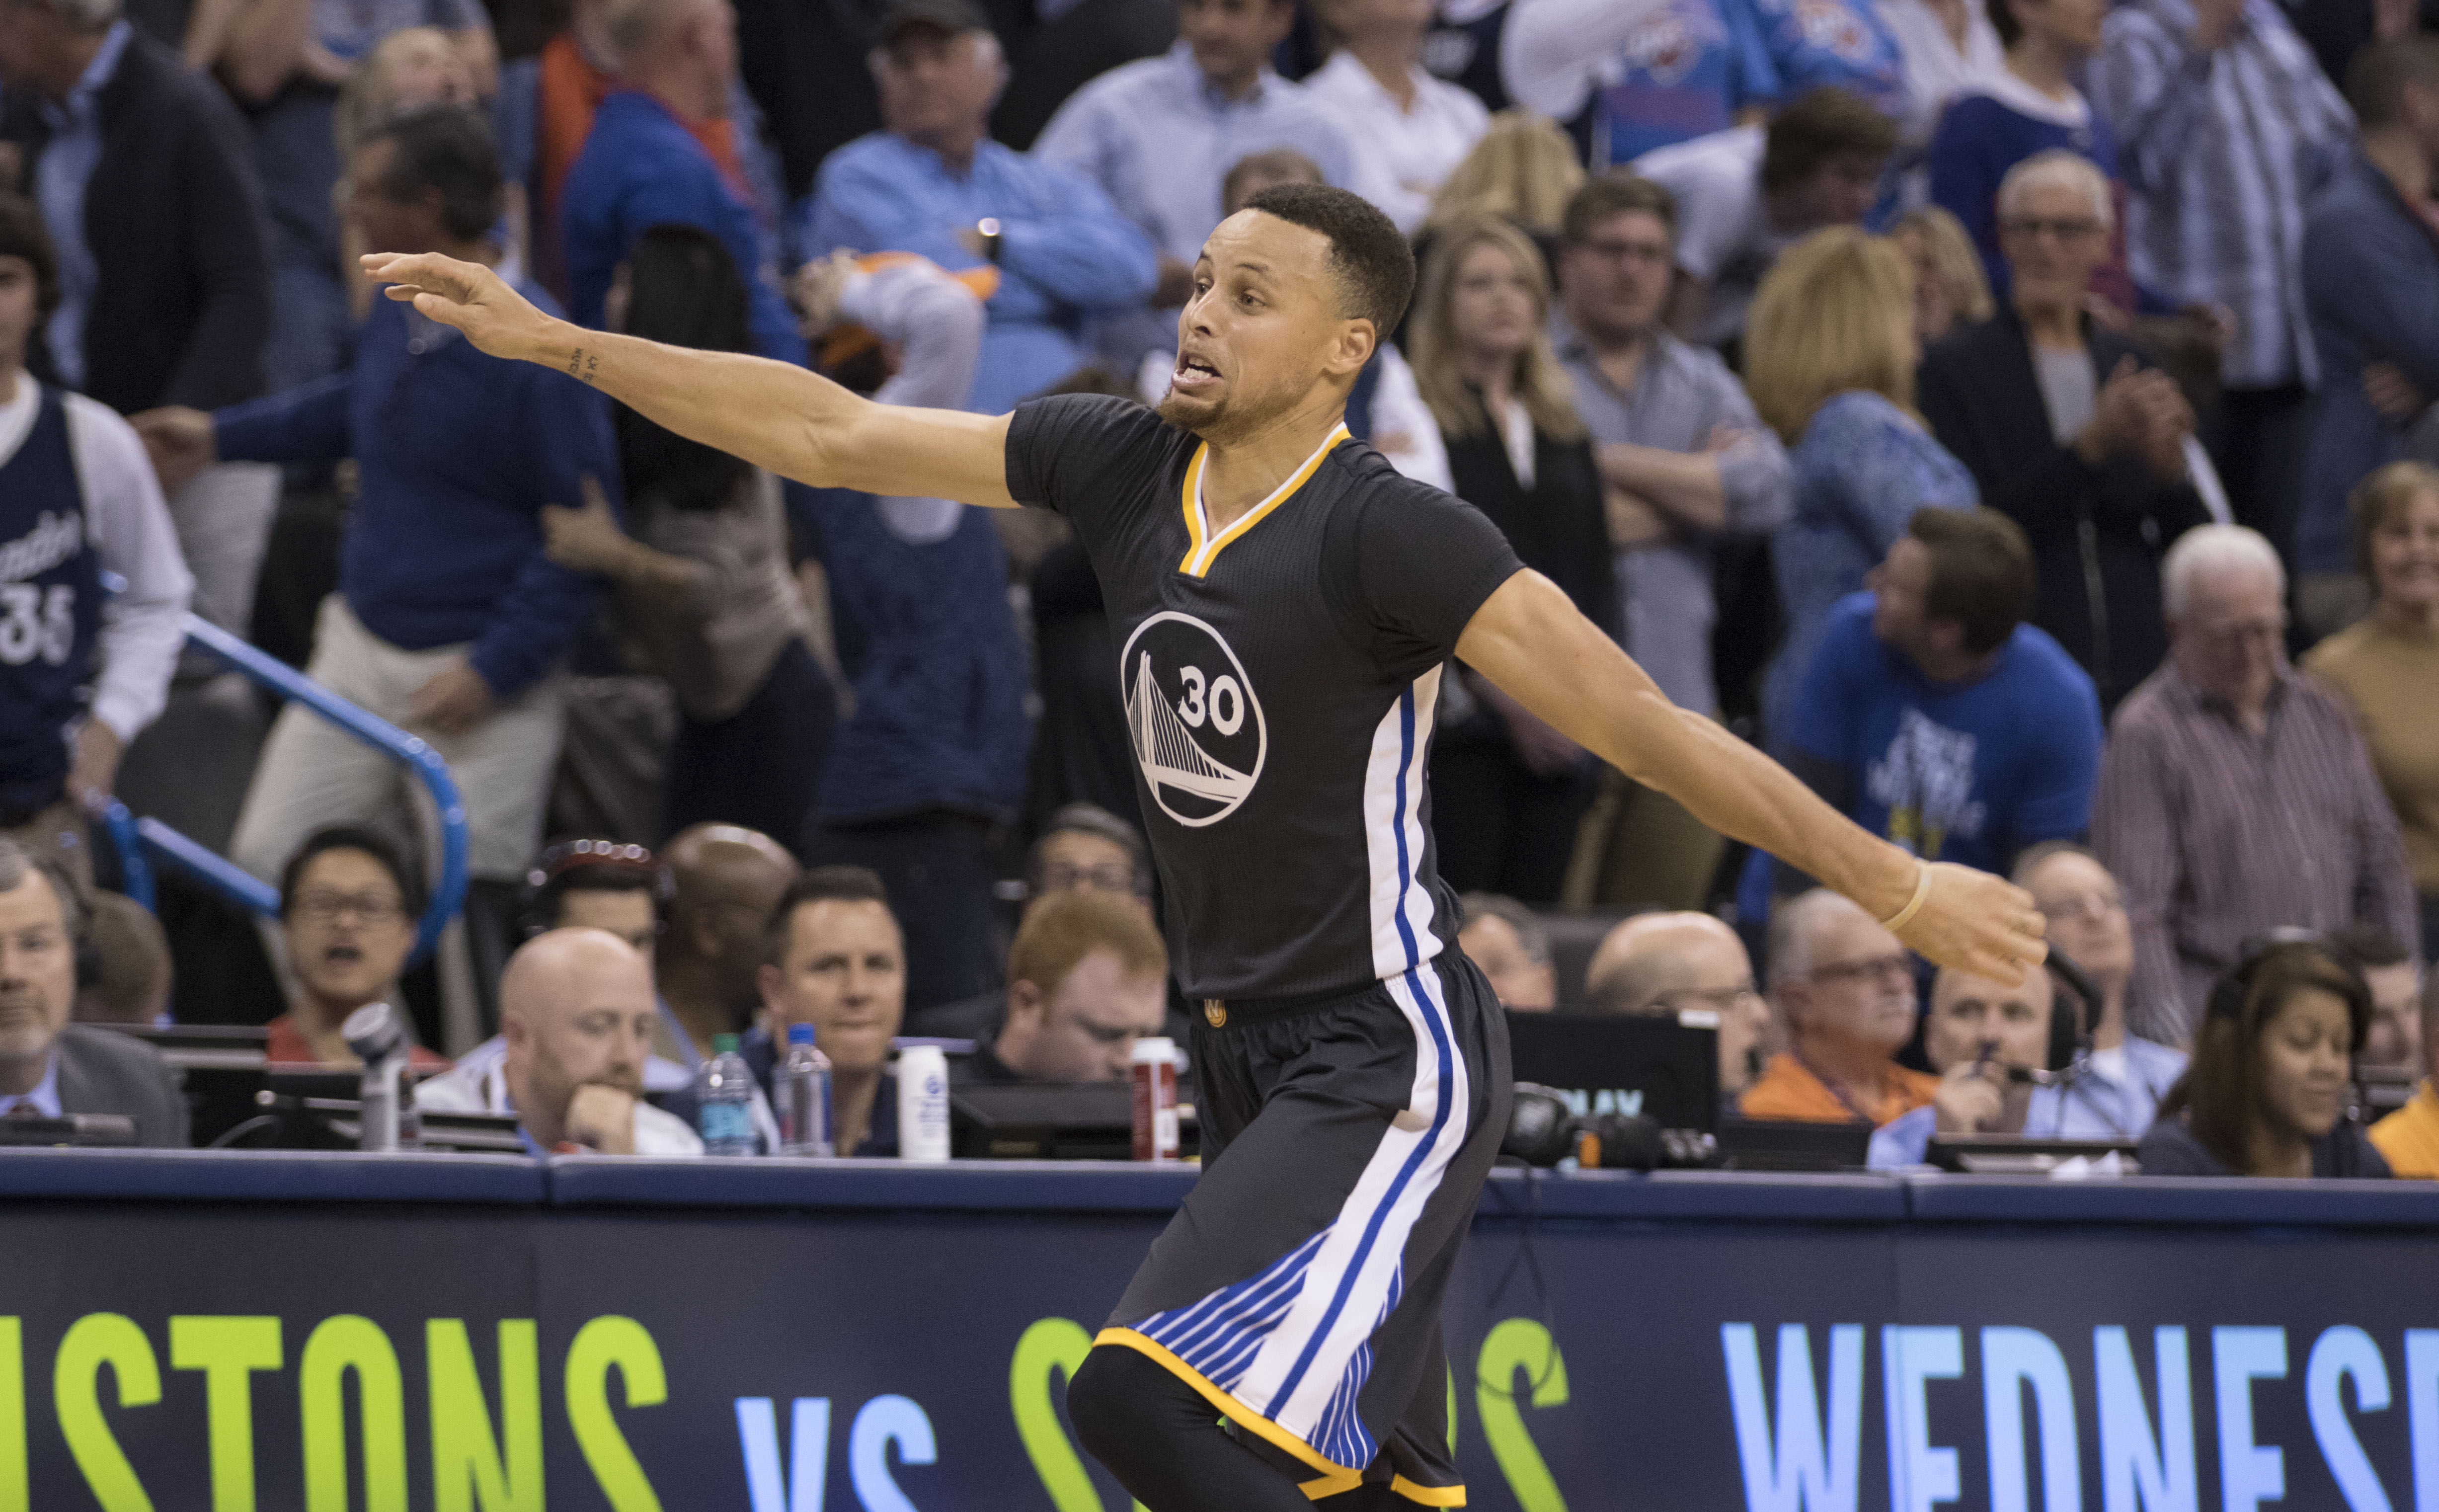 LOOK: Stephen Curry’s new $5.8M home in Alamo